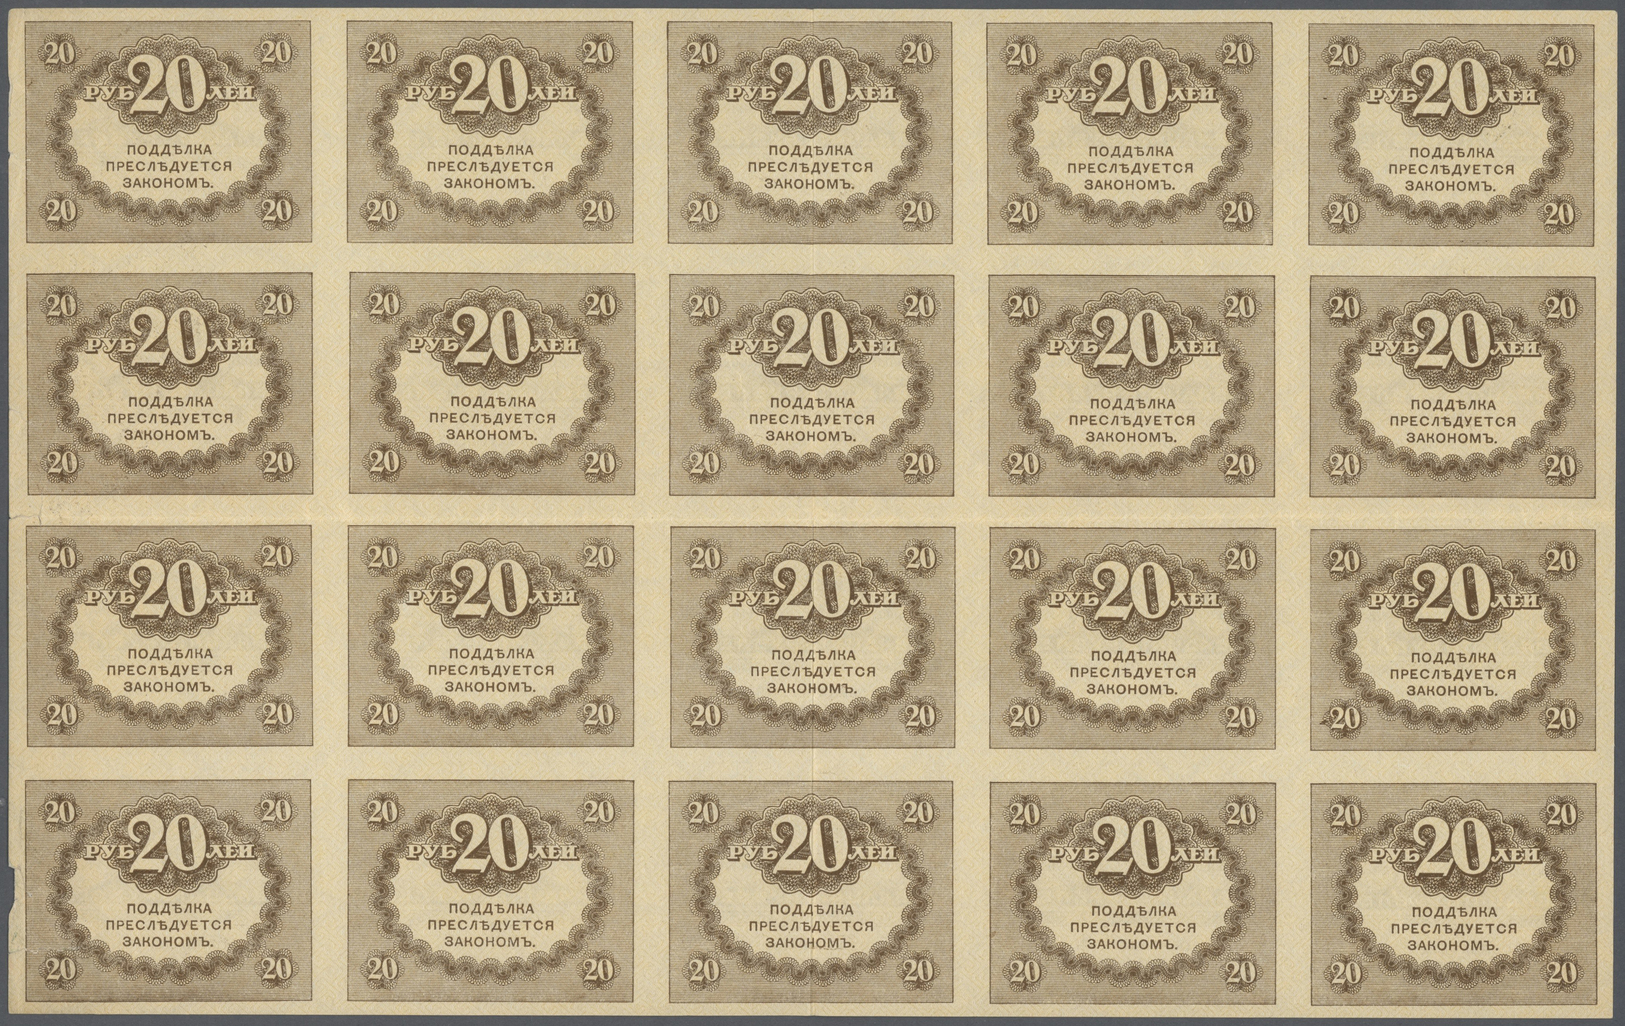 02119 Russia / Russland: Uncut Sheet With 20 X 20 Rubles ND(1917), P.38, So Called "Kerenskiy Ruble" Issue In Nice Condi - Russia